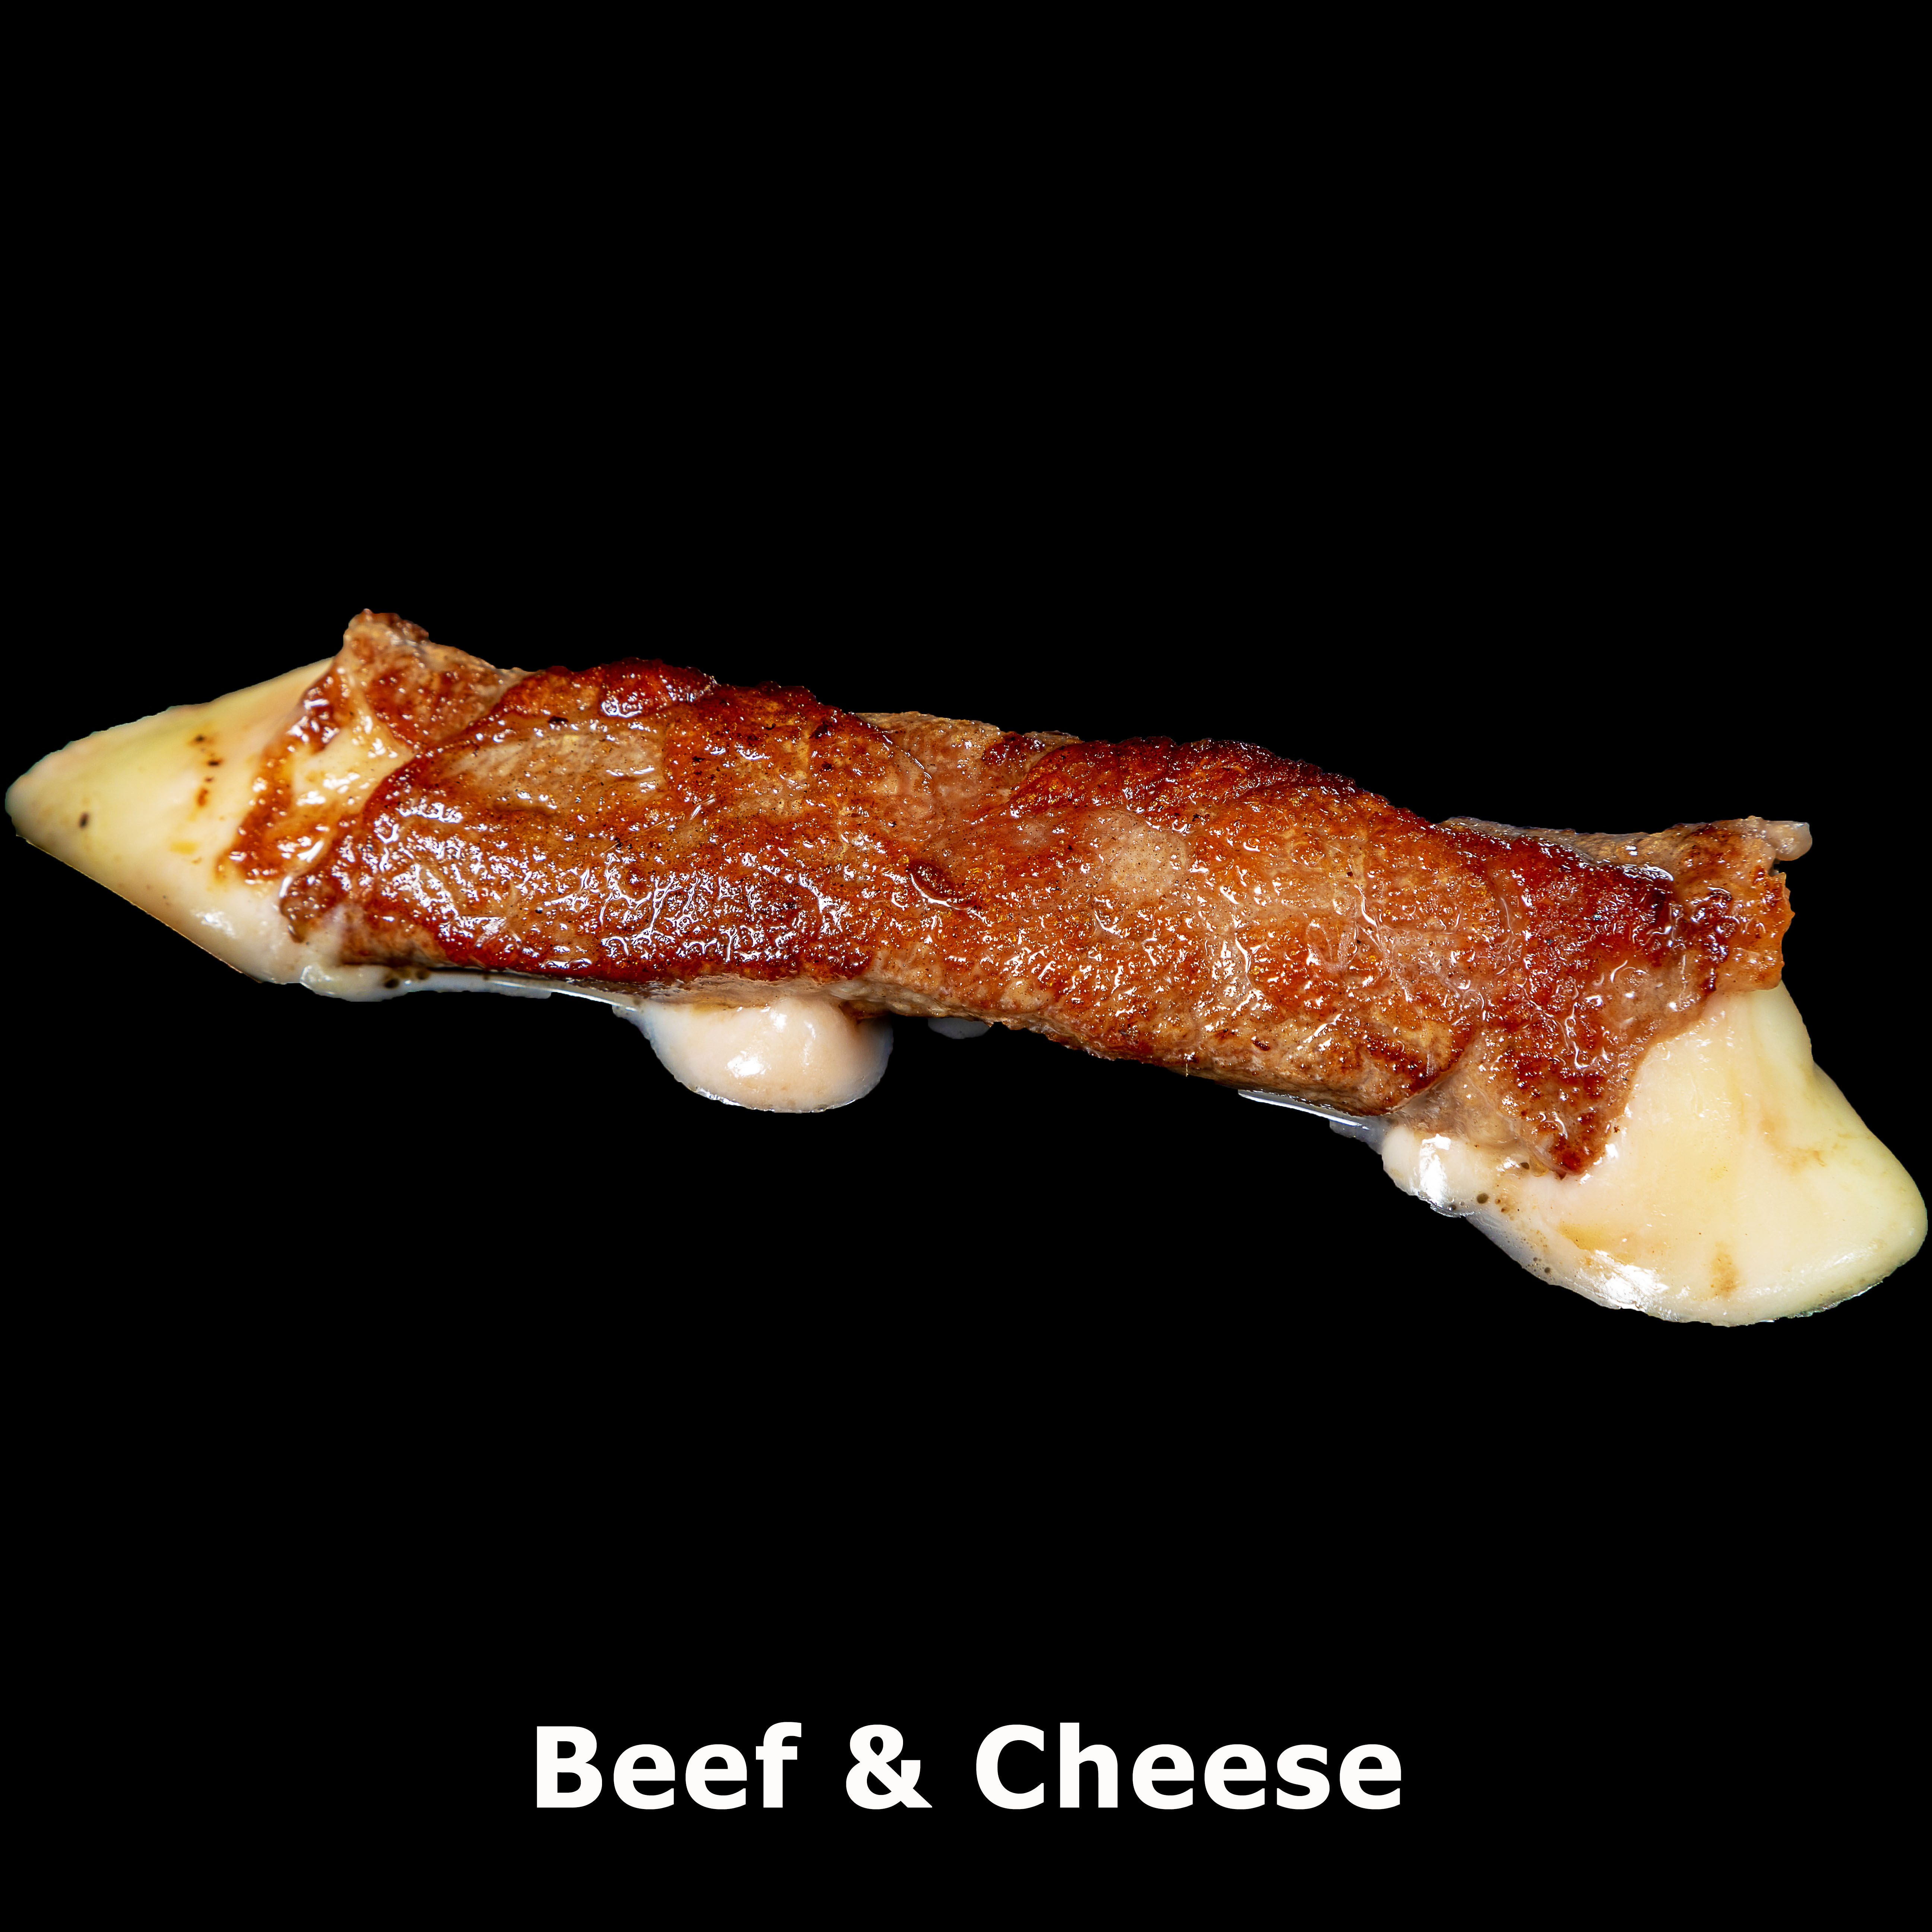 141. Beef & Cheese